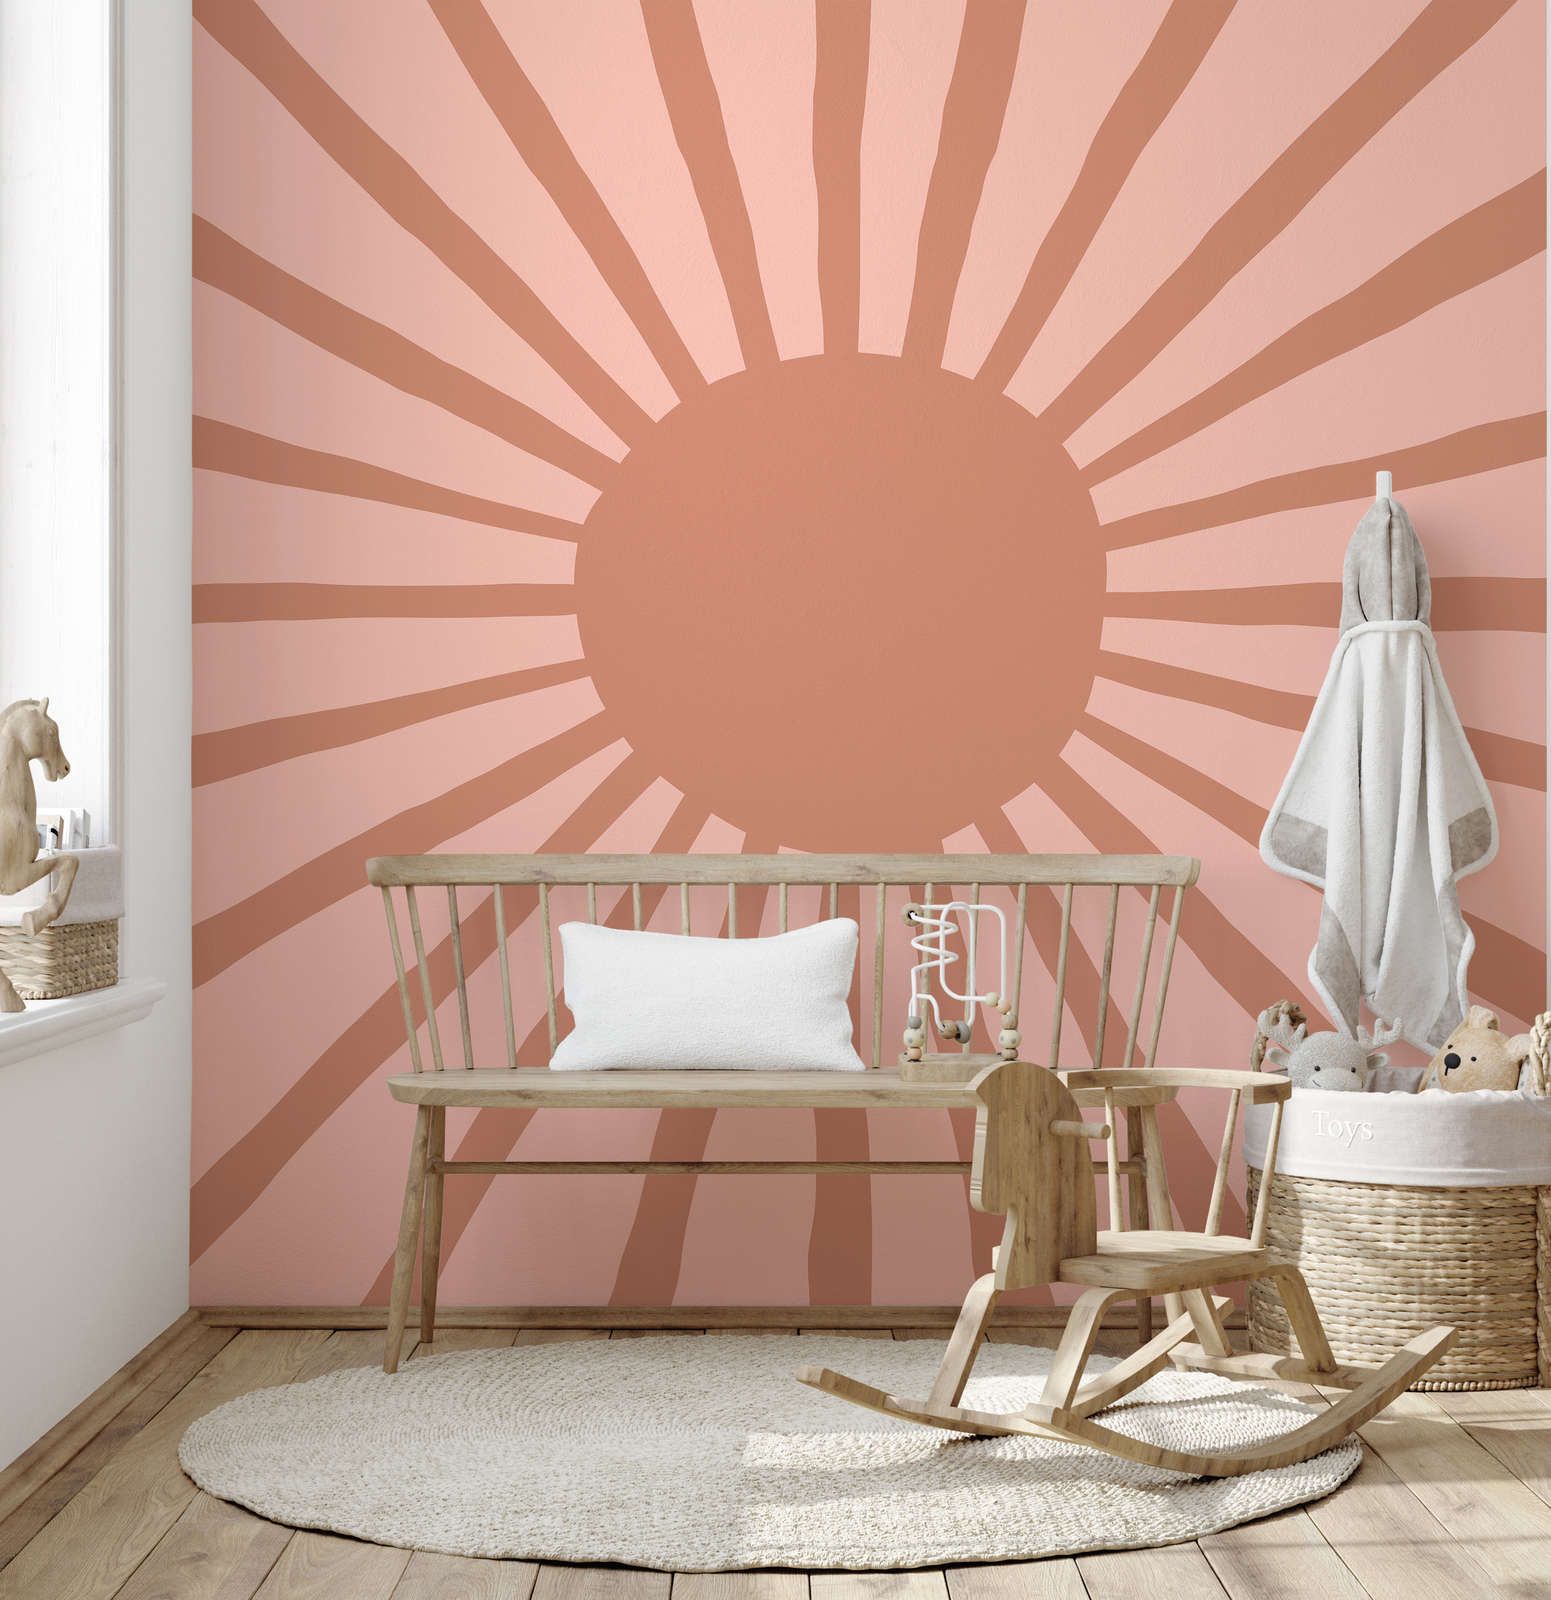             Painted Style Abstract Sun Wallpaper - Smooth & Pearlescent Non-woven
        